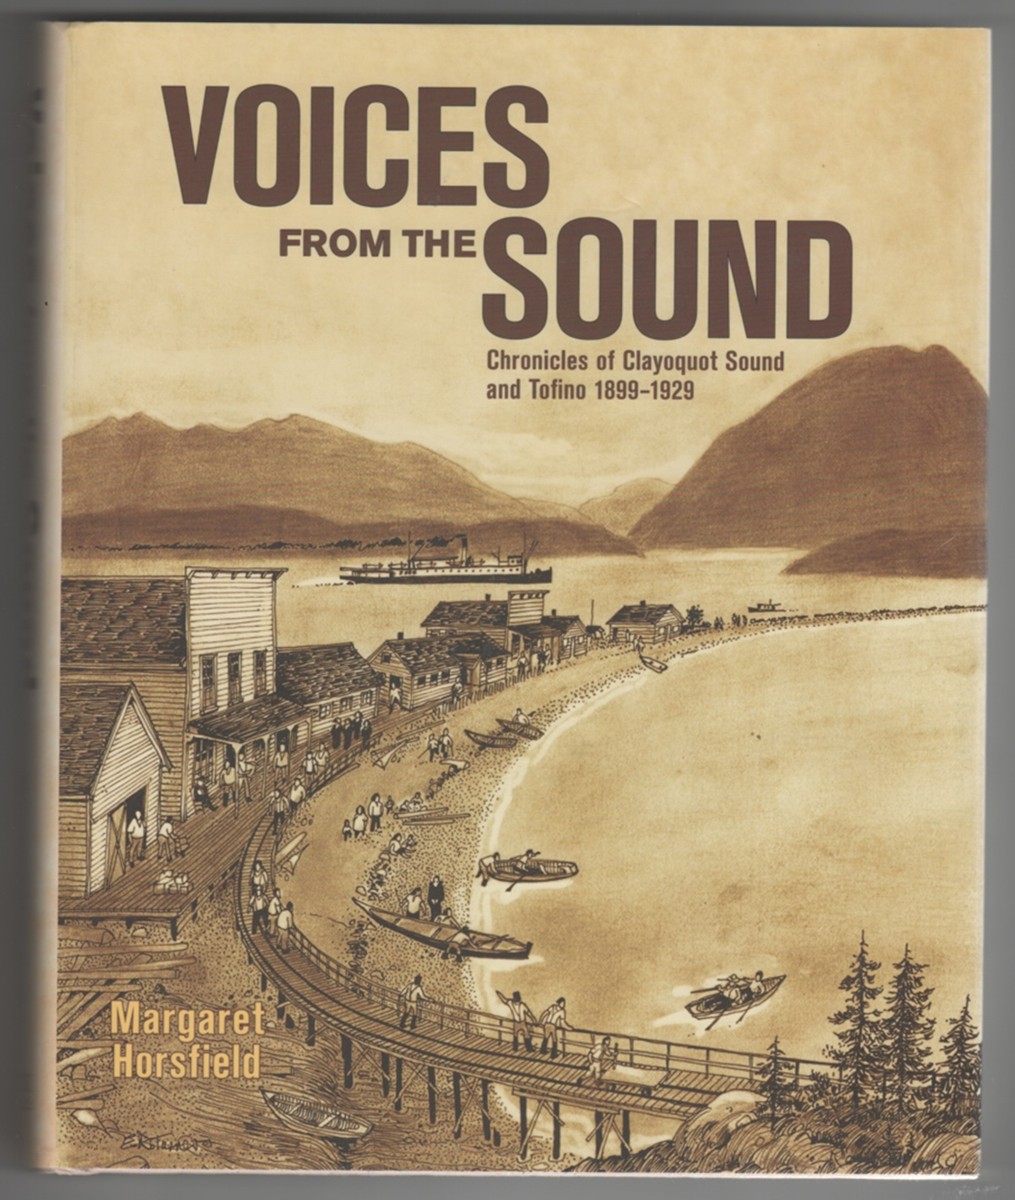 HORSFIELD, MARGARET - Voices from the Sound Chronicles of Clayoquot Sound and Tofino, 1899